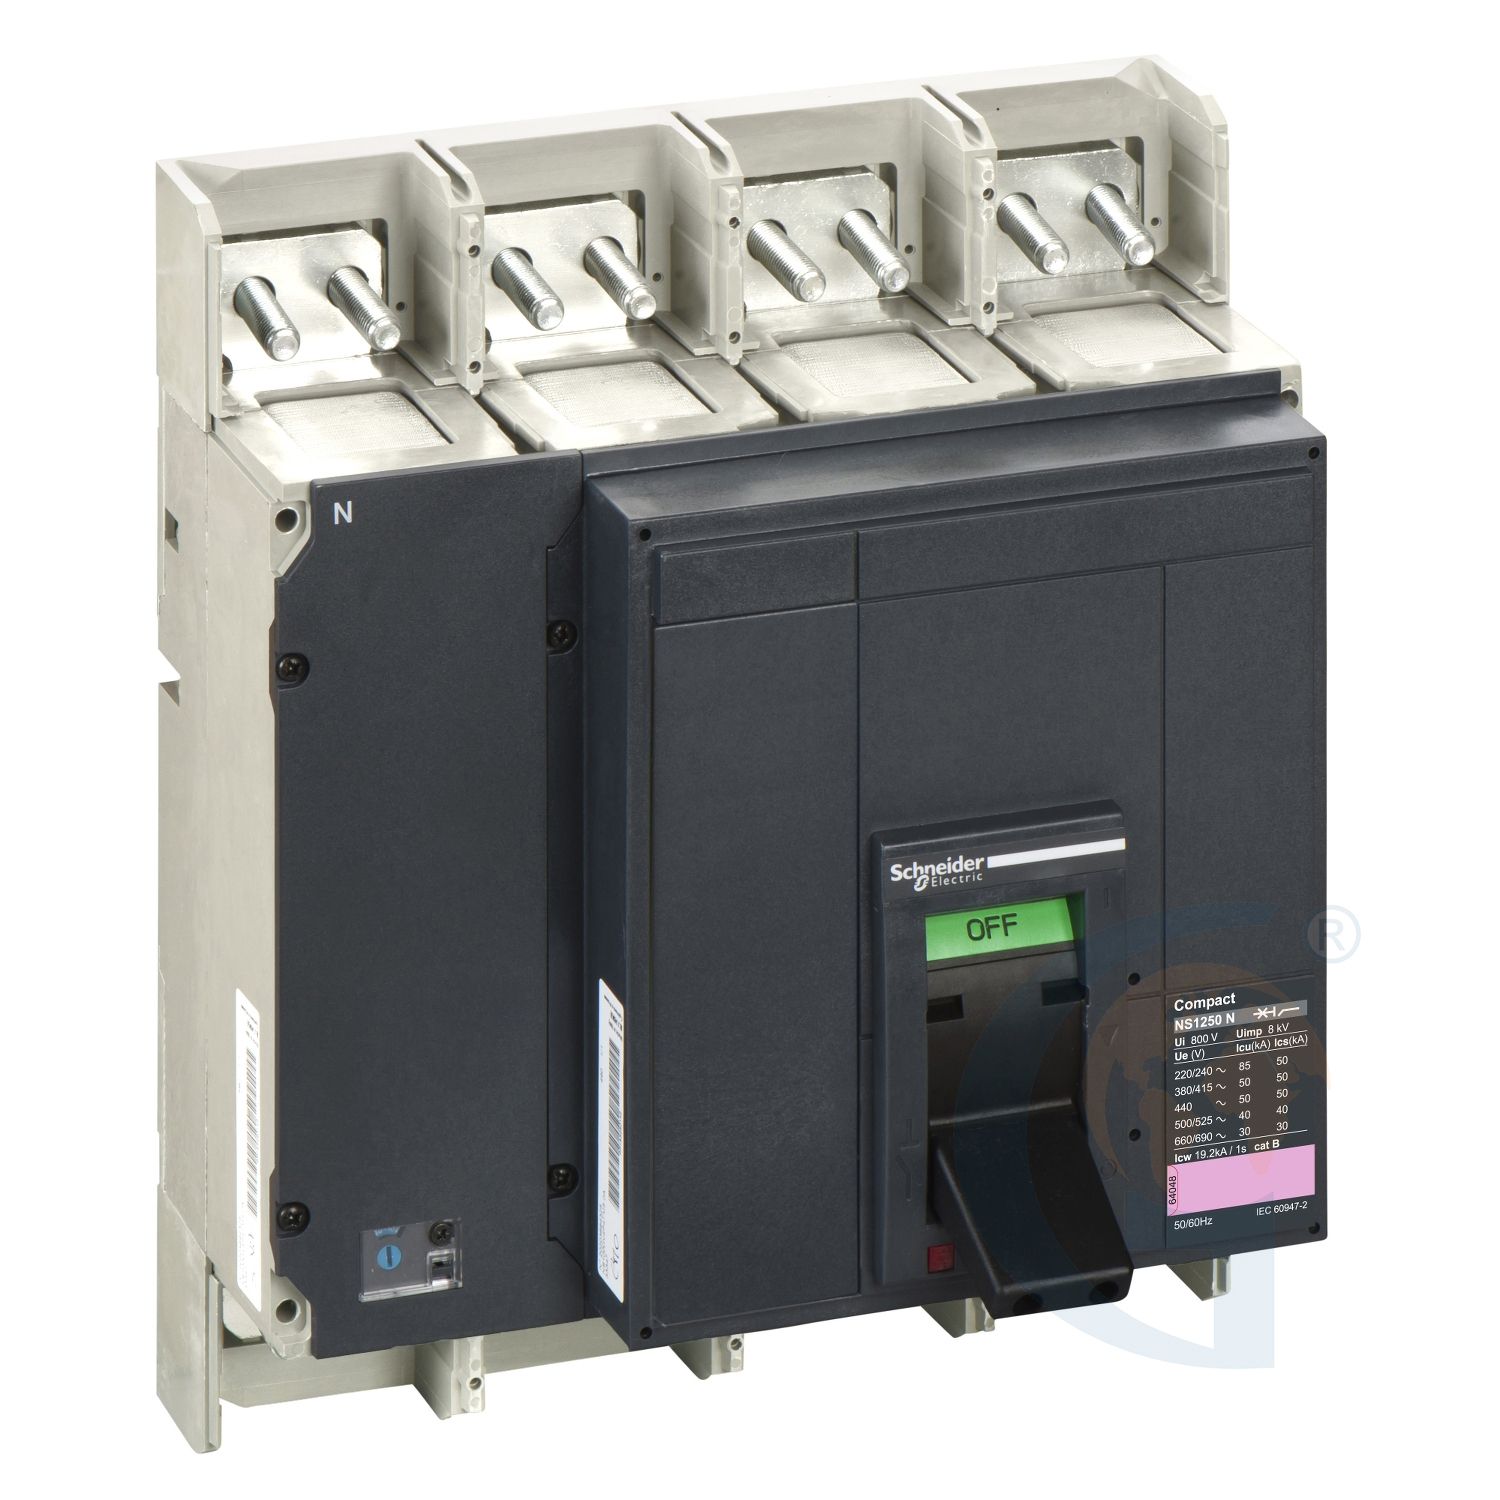 Schneider Electric 33254 circuit breaker basic frame, Compact NS 1250N, 50 kA at 415 VAC, 1250 A, fixed, manually operated, without trip unit, 4P https://gesrepair.com/wp-content/uploads/2020/Schneider/Schneider_Electric_33254_.jpg